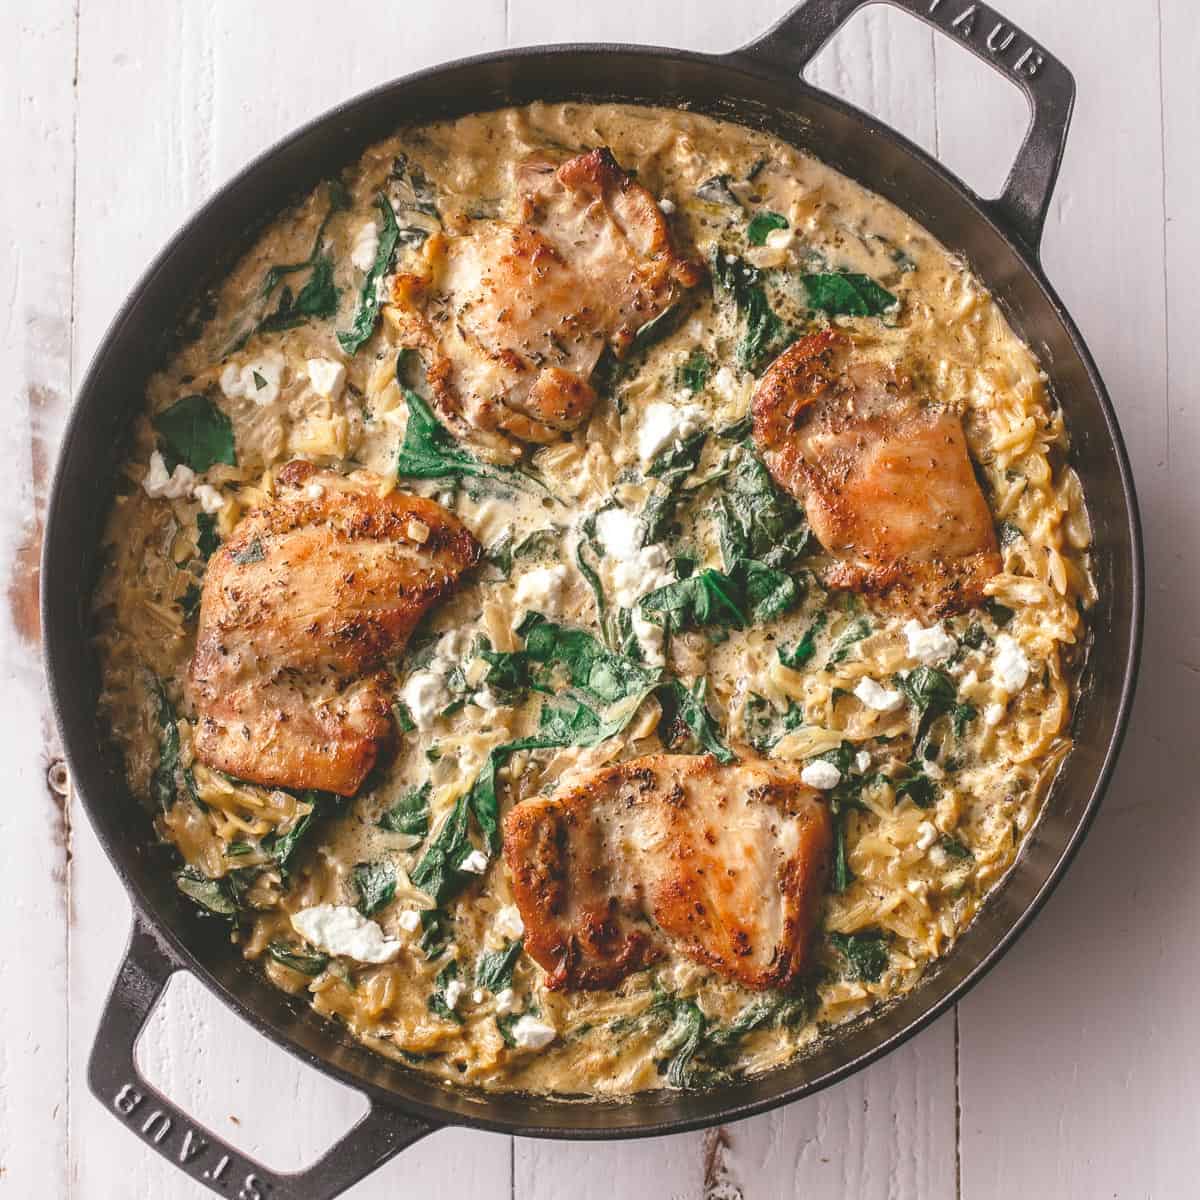 https://inquiringchef.com/wp-content/uploads/2021/03/One-Pan-Chicken-and-Orzo-with-Spinach_square.jpg